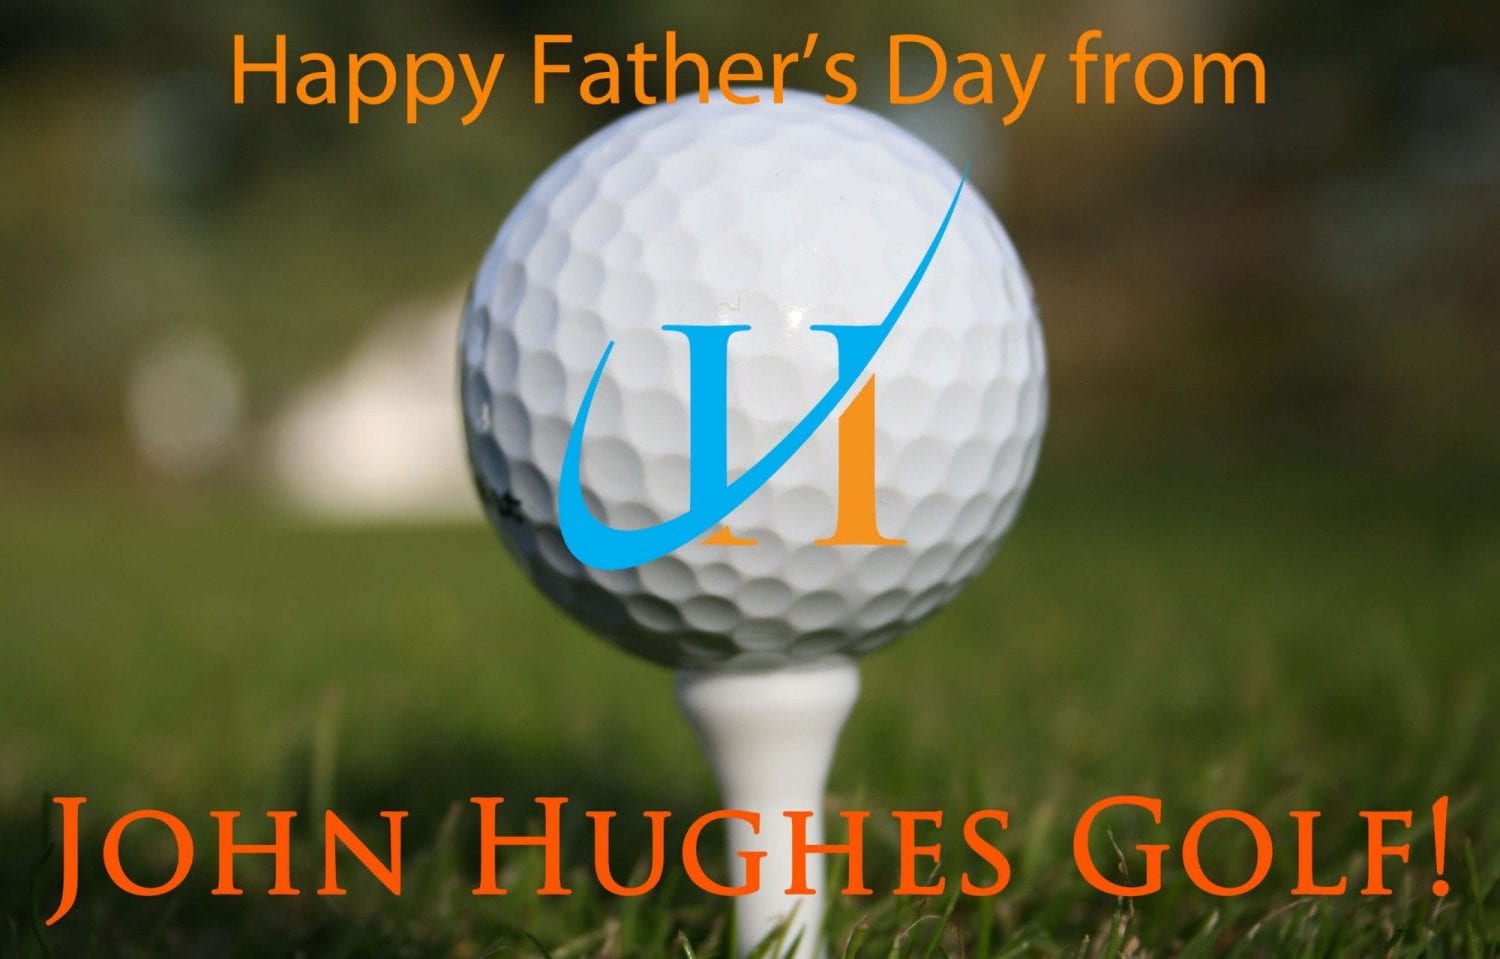 Happy Father's Day, 5 Father's Day Gift Suggestions, Happy Father's Day from John Hughes Golf, Beginner Golf Lessons in Orlando, Beginner Golf Schools in Orlando, John Hughes Golf, Orlando Golf Lessons, Orlando Golf Schools, Orlando Beginner Golf Lessons, Orlando Beginner Golf Schools, Kissimmee Golf Lessons, Kissimmee Golf Schools, Orlando Junior Golf Lessons, Orlando Junior Golf Schools, Orlando Junior Golf Camps, Orlando Ladies Golf Lessons, Orlando Ladies Golf Schools, Florida Golf Lessons, Florida Golf Schools, Orlando Golf School Vacationslf